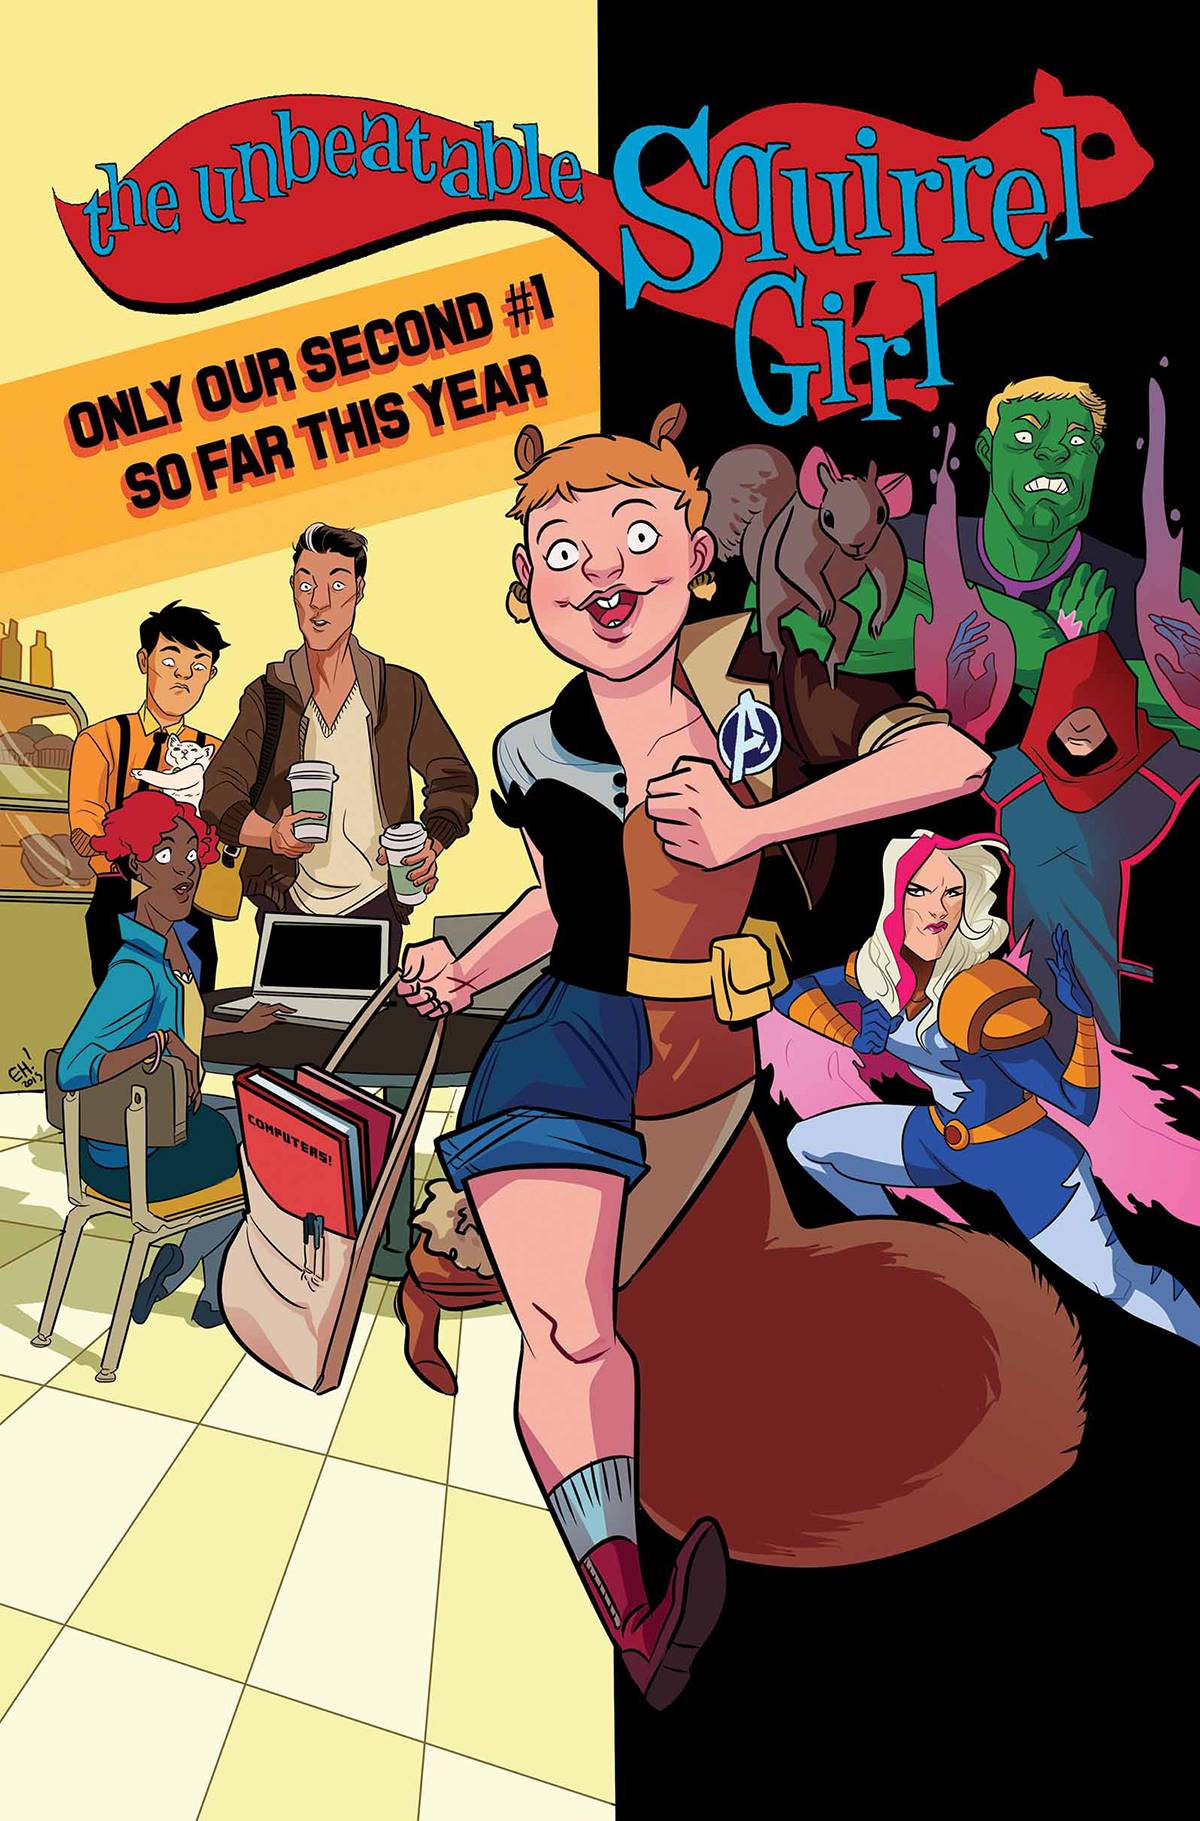 Unbeatable Squirrel Girl #1 by Henderson Poster